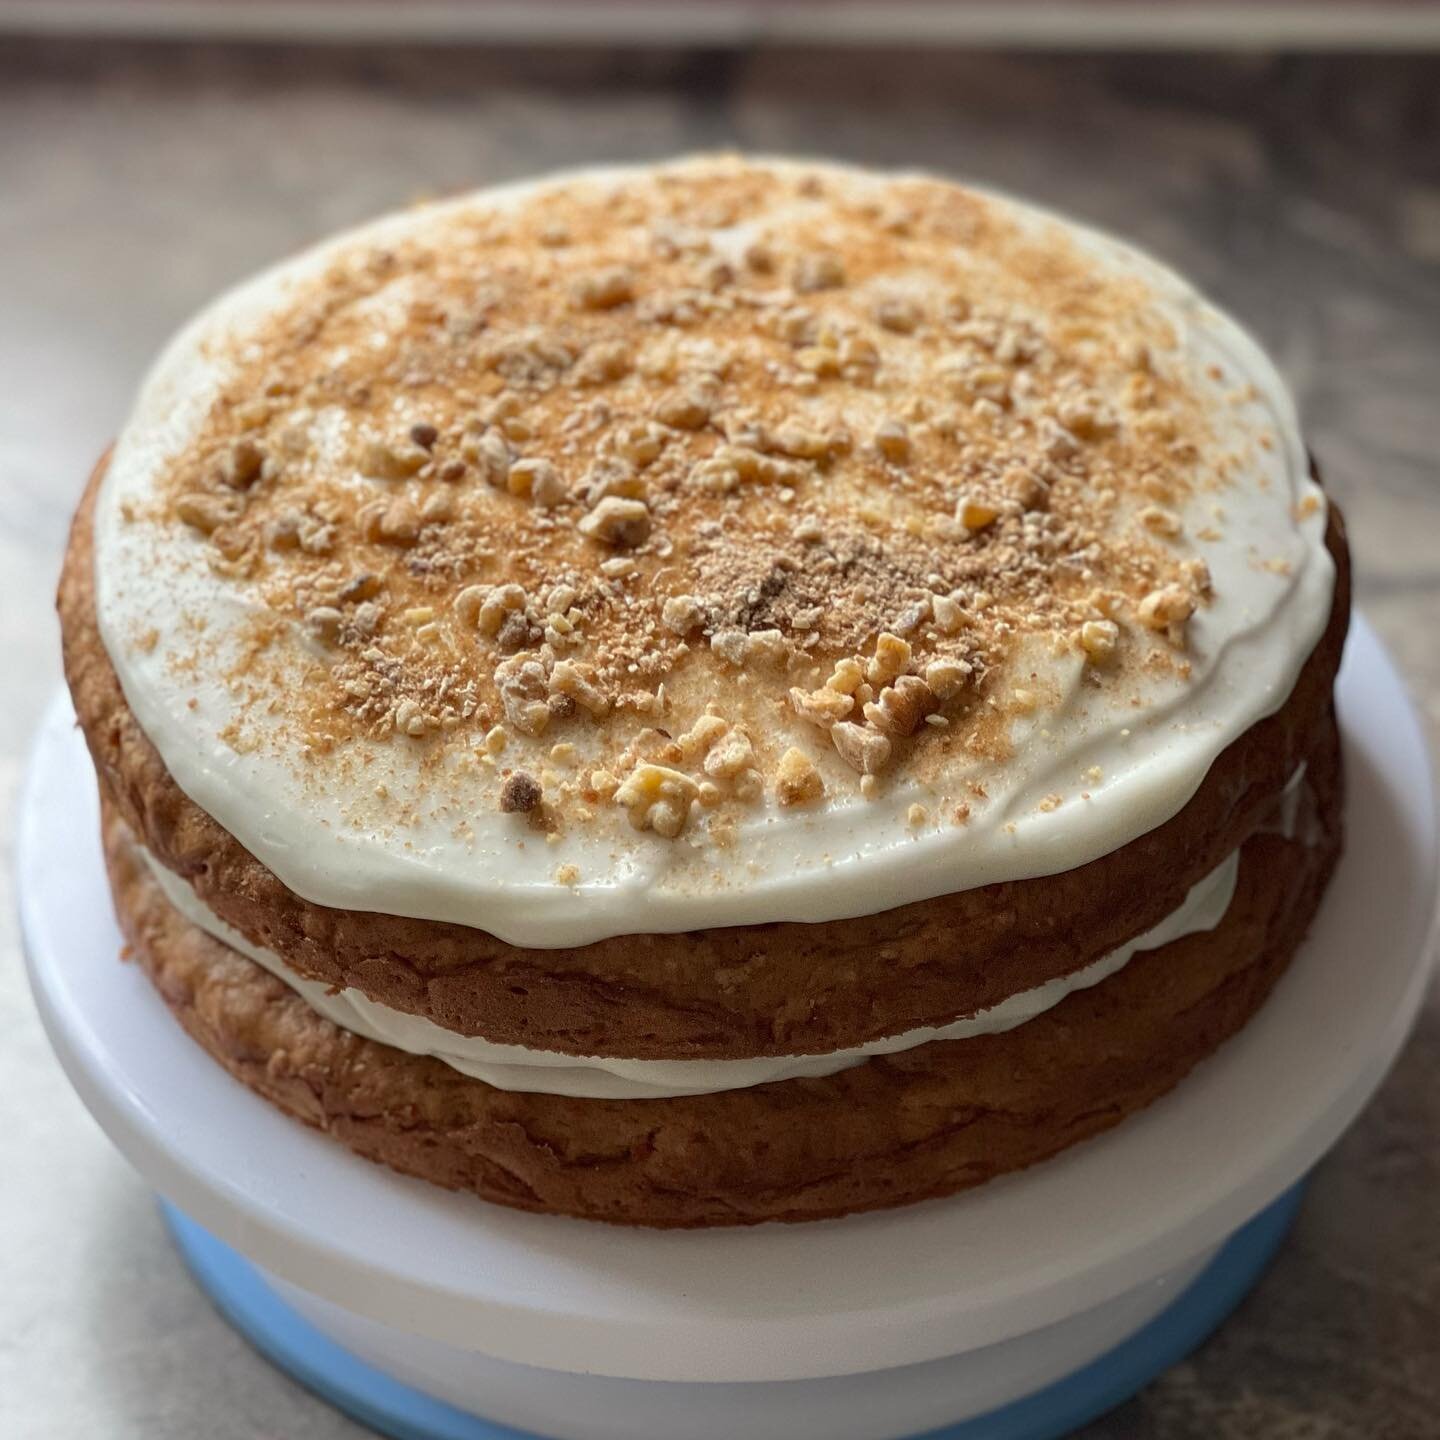 Carrot &amp; Ginger &ldquo;hurl together what you&rsquo;ve got in the cupboards&rdquo; Dairy &amp; Gluten Free Birthday cake for @thomascrossley_ 🥕👩&zwj;🌾🧑🏽&zwj;🌾🎂

You too can bake your own hurl it together cake by distractedly guessing propo